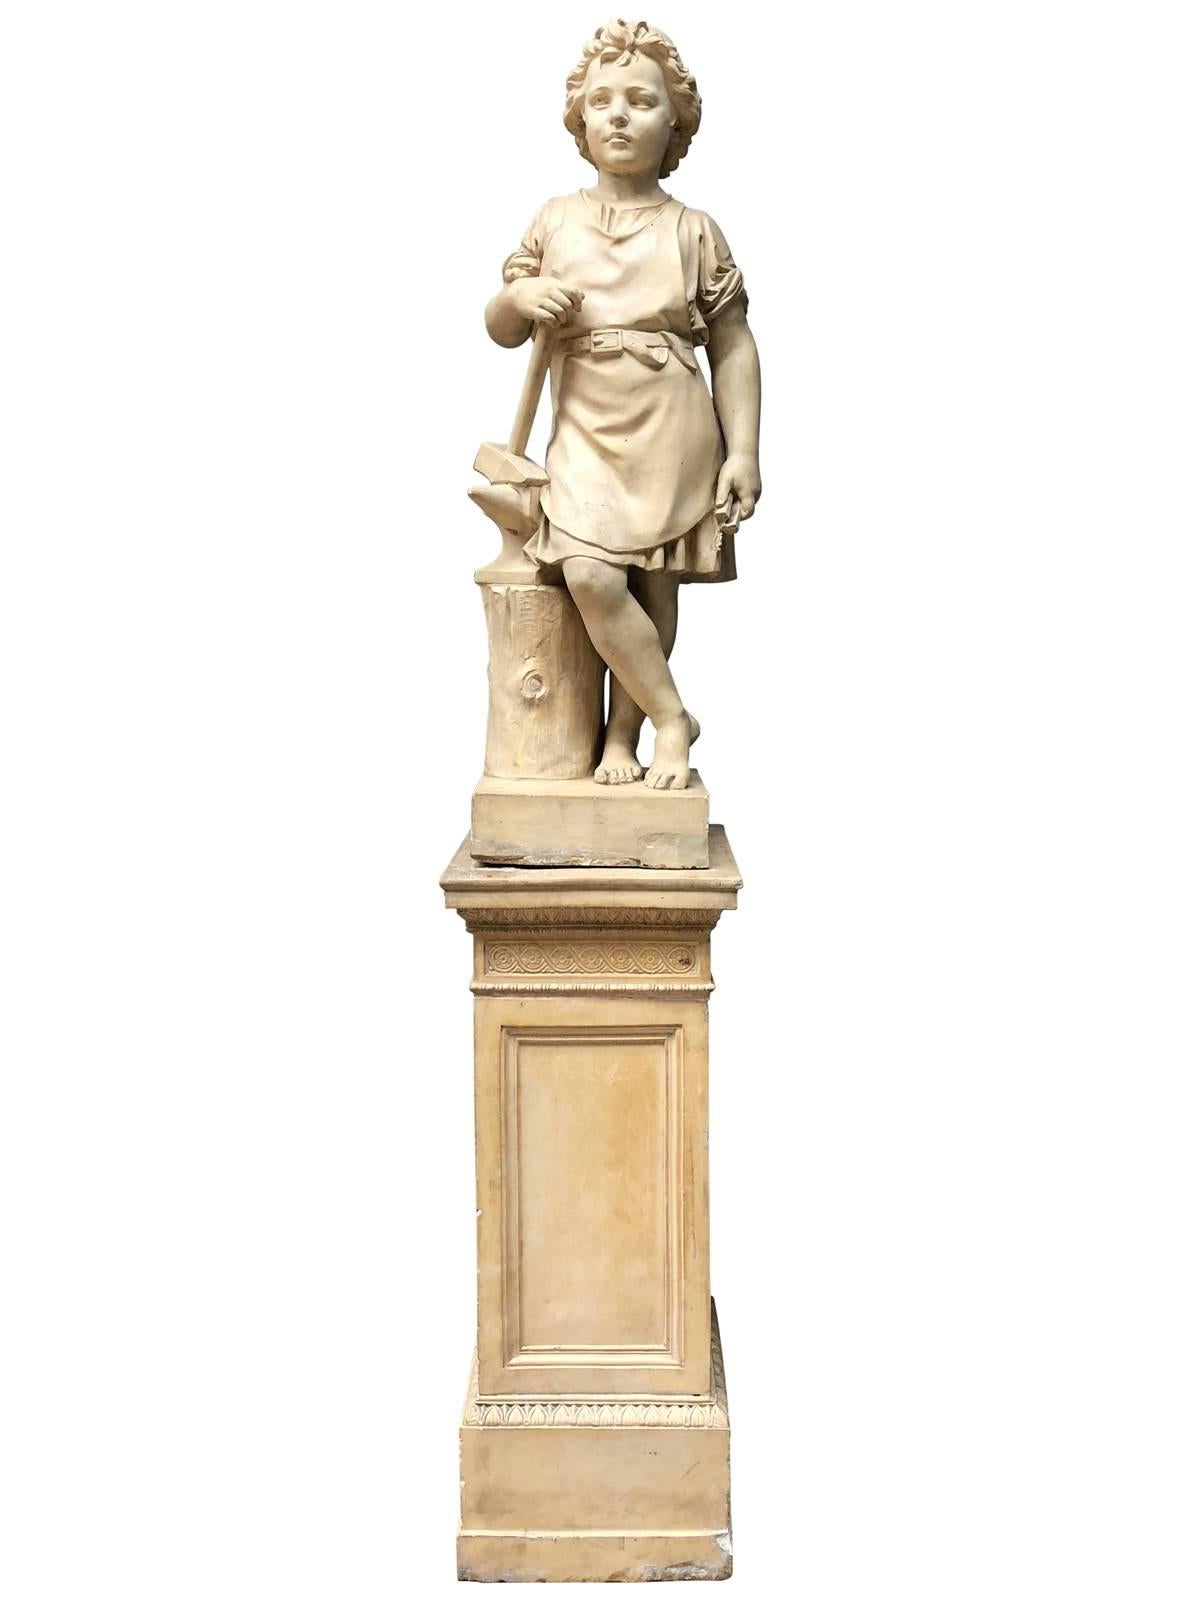 Dated from the 19th century, circa 1820, pair of neoclassical terracotta statue representing Vulcan and Mercury children. Vulcan is the patron god of fire, volcanoes and smiths, which is recognizable by his Hammer, his apron and his anvil; and